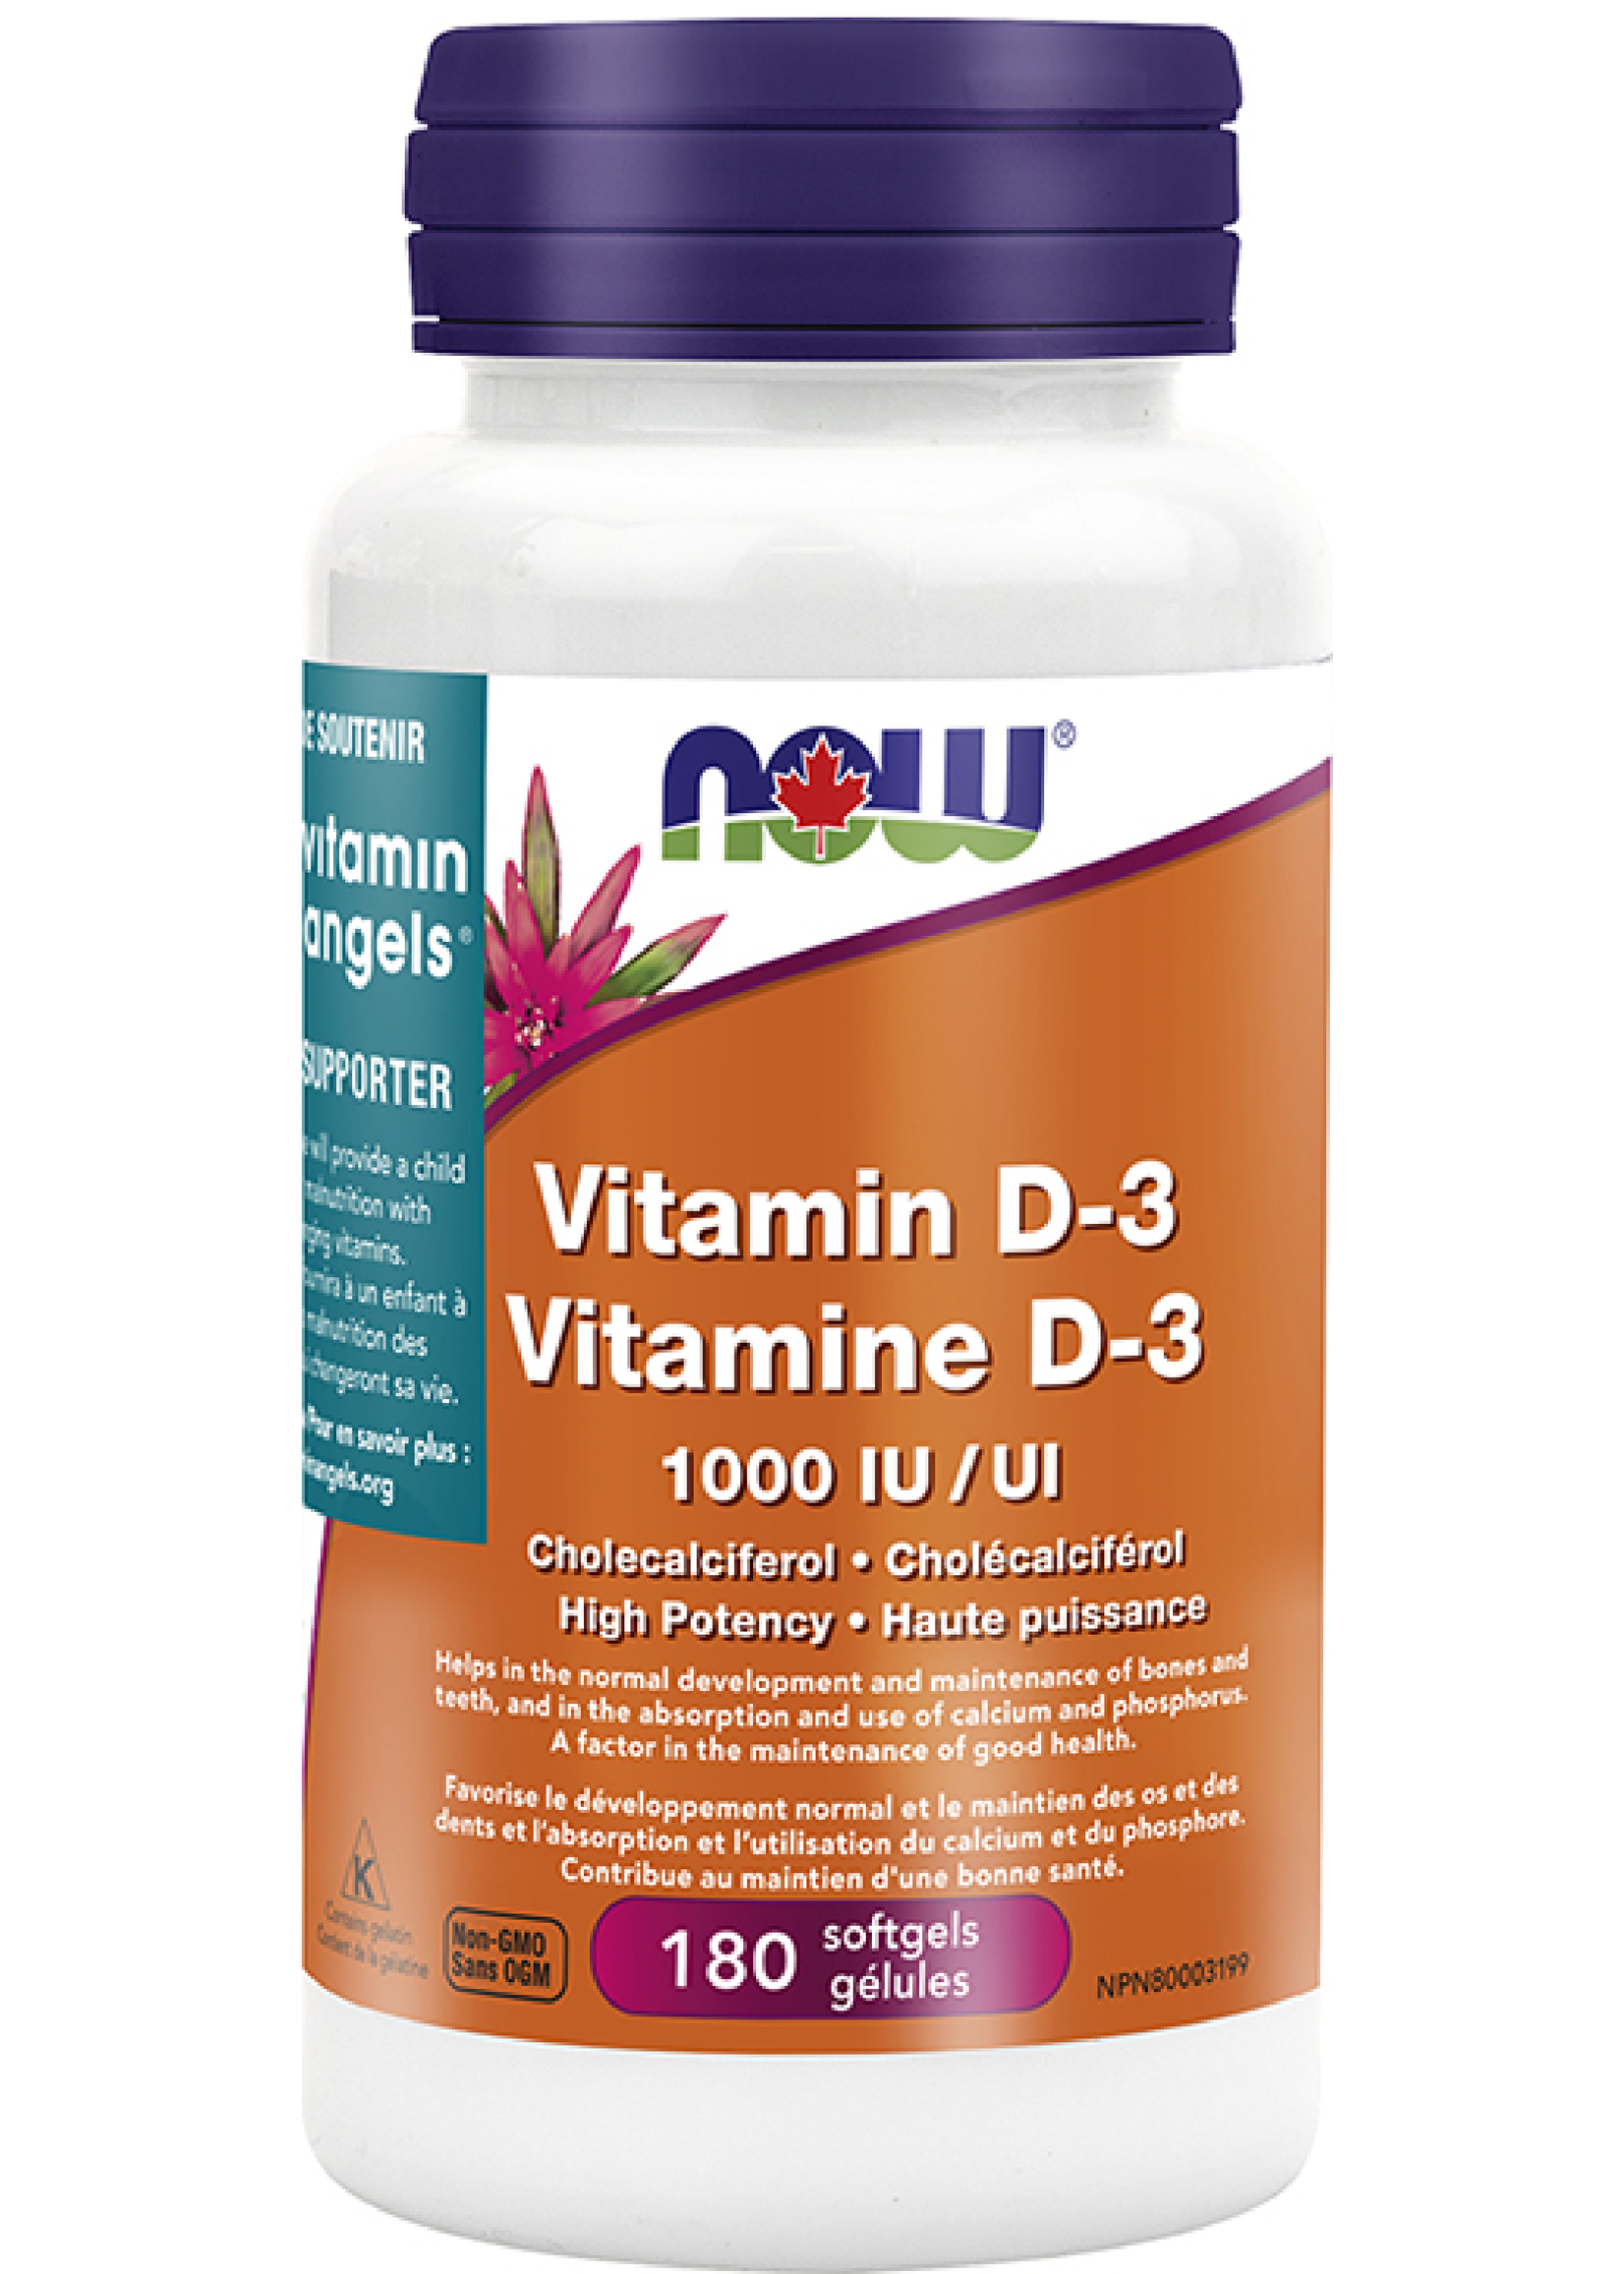 Now Now Vitamin D3 1000IU 180caps - Thank you for Supporting the Vitamin Angels Charity!